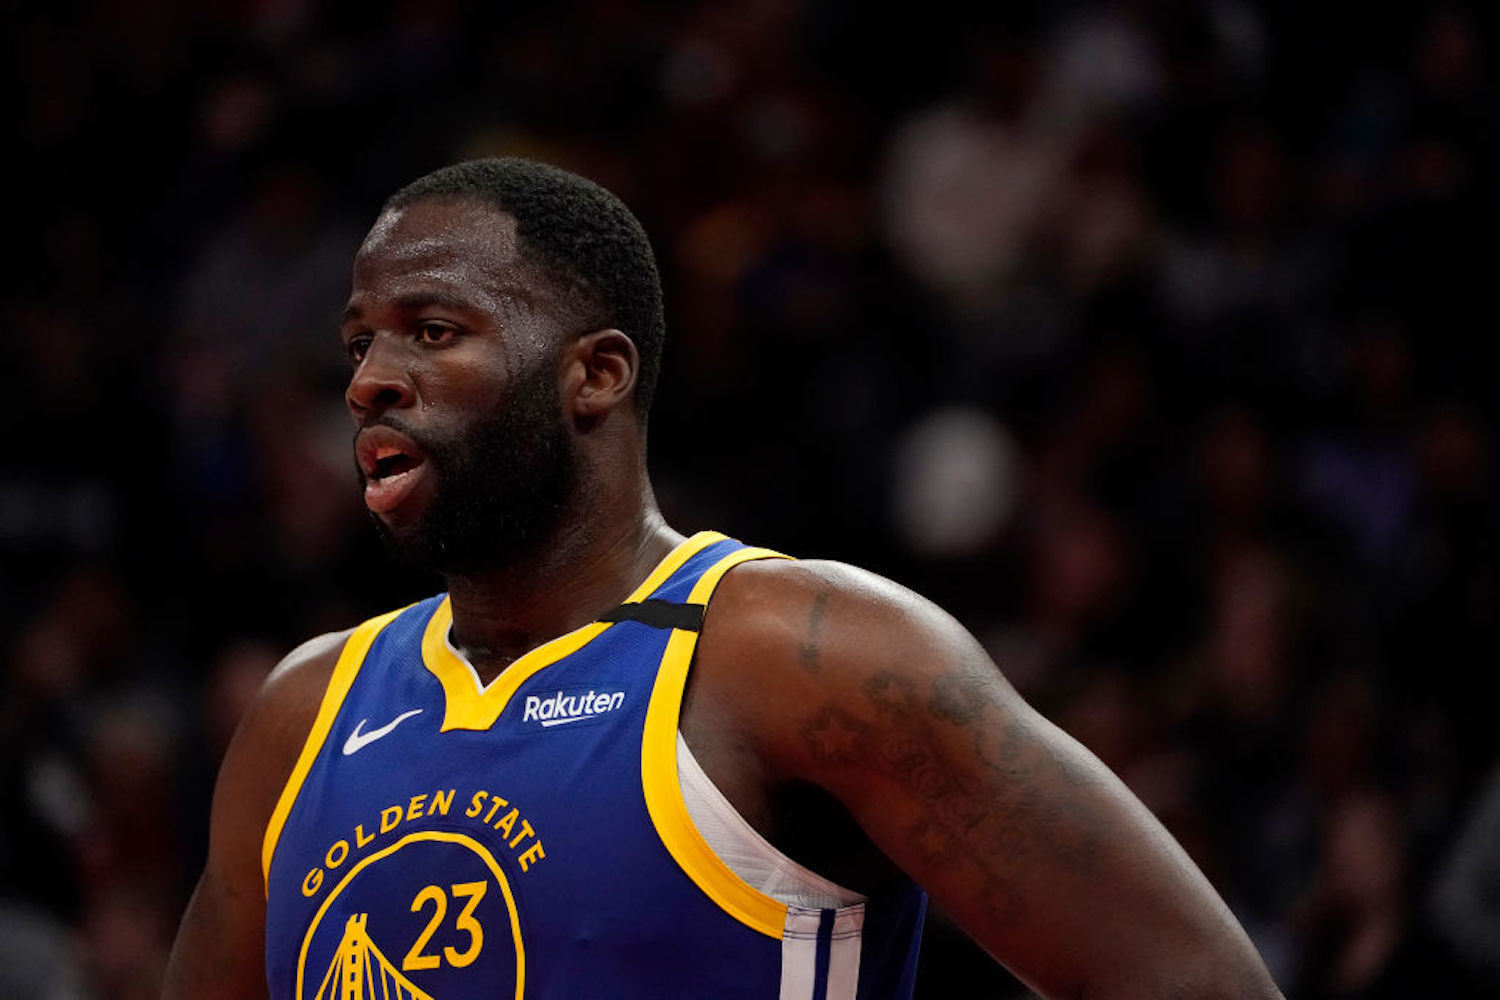 The Golden State Warriors will be without Draymond Green for their season opener. Why is Green sitting out Tuesday and is it COVID-related?